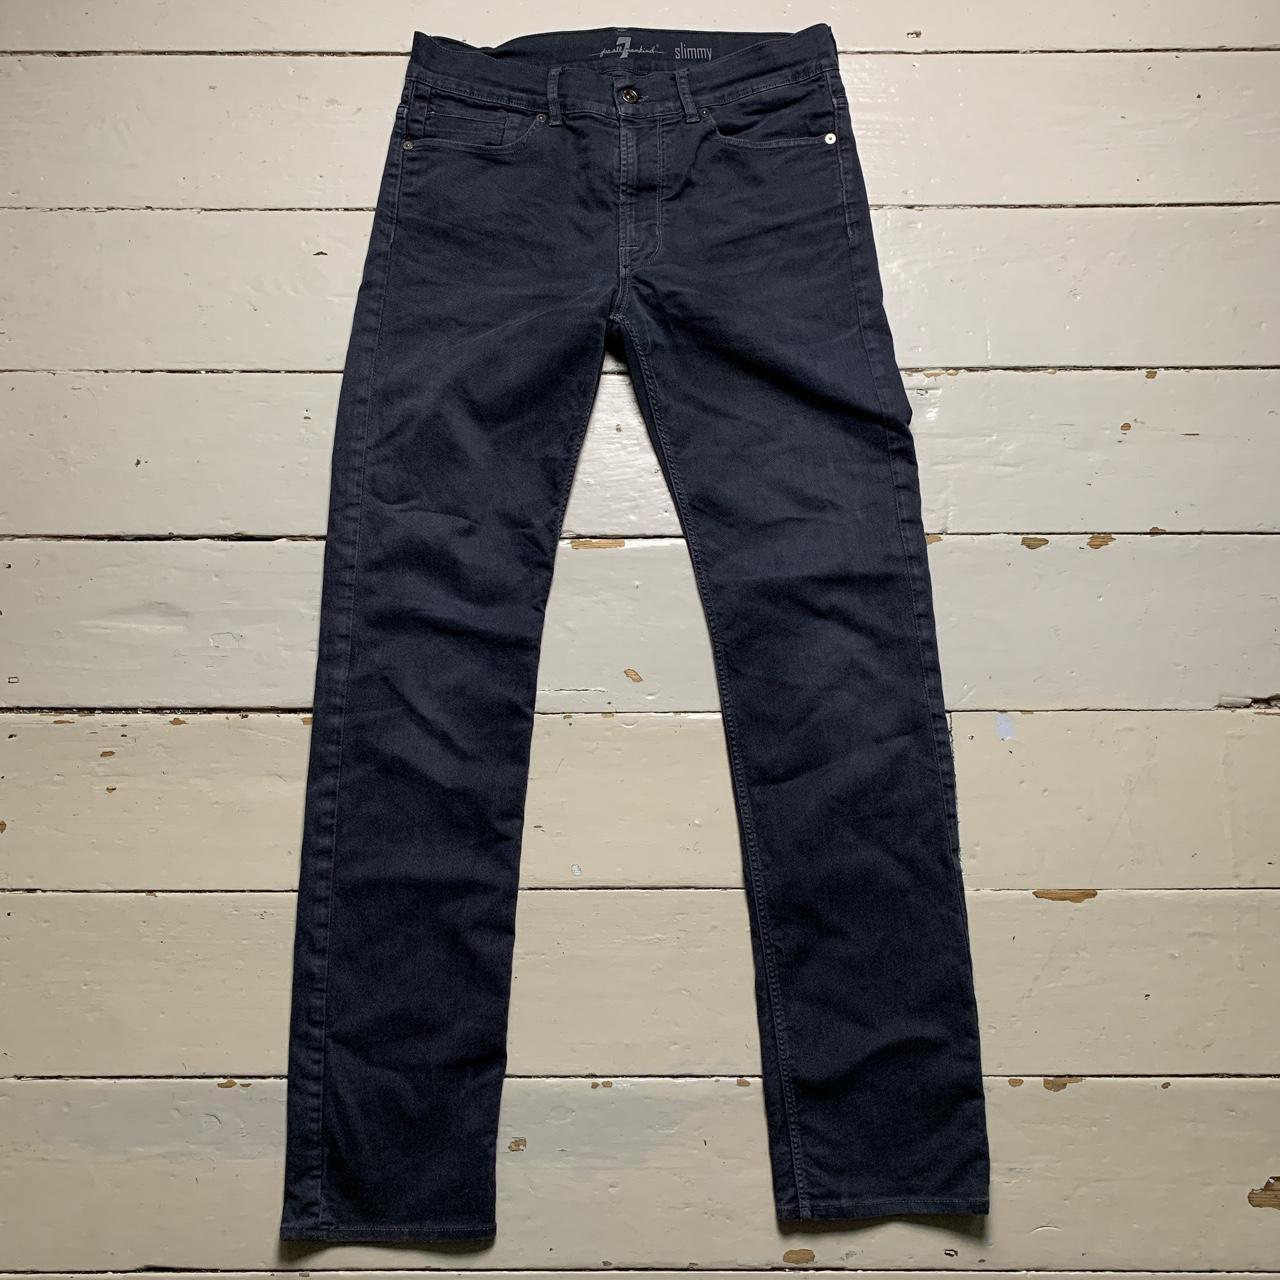 7 for all Mankind Slimmy Dark Navy Jeans